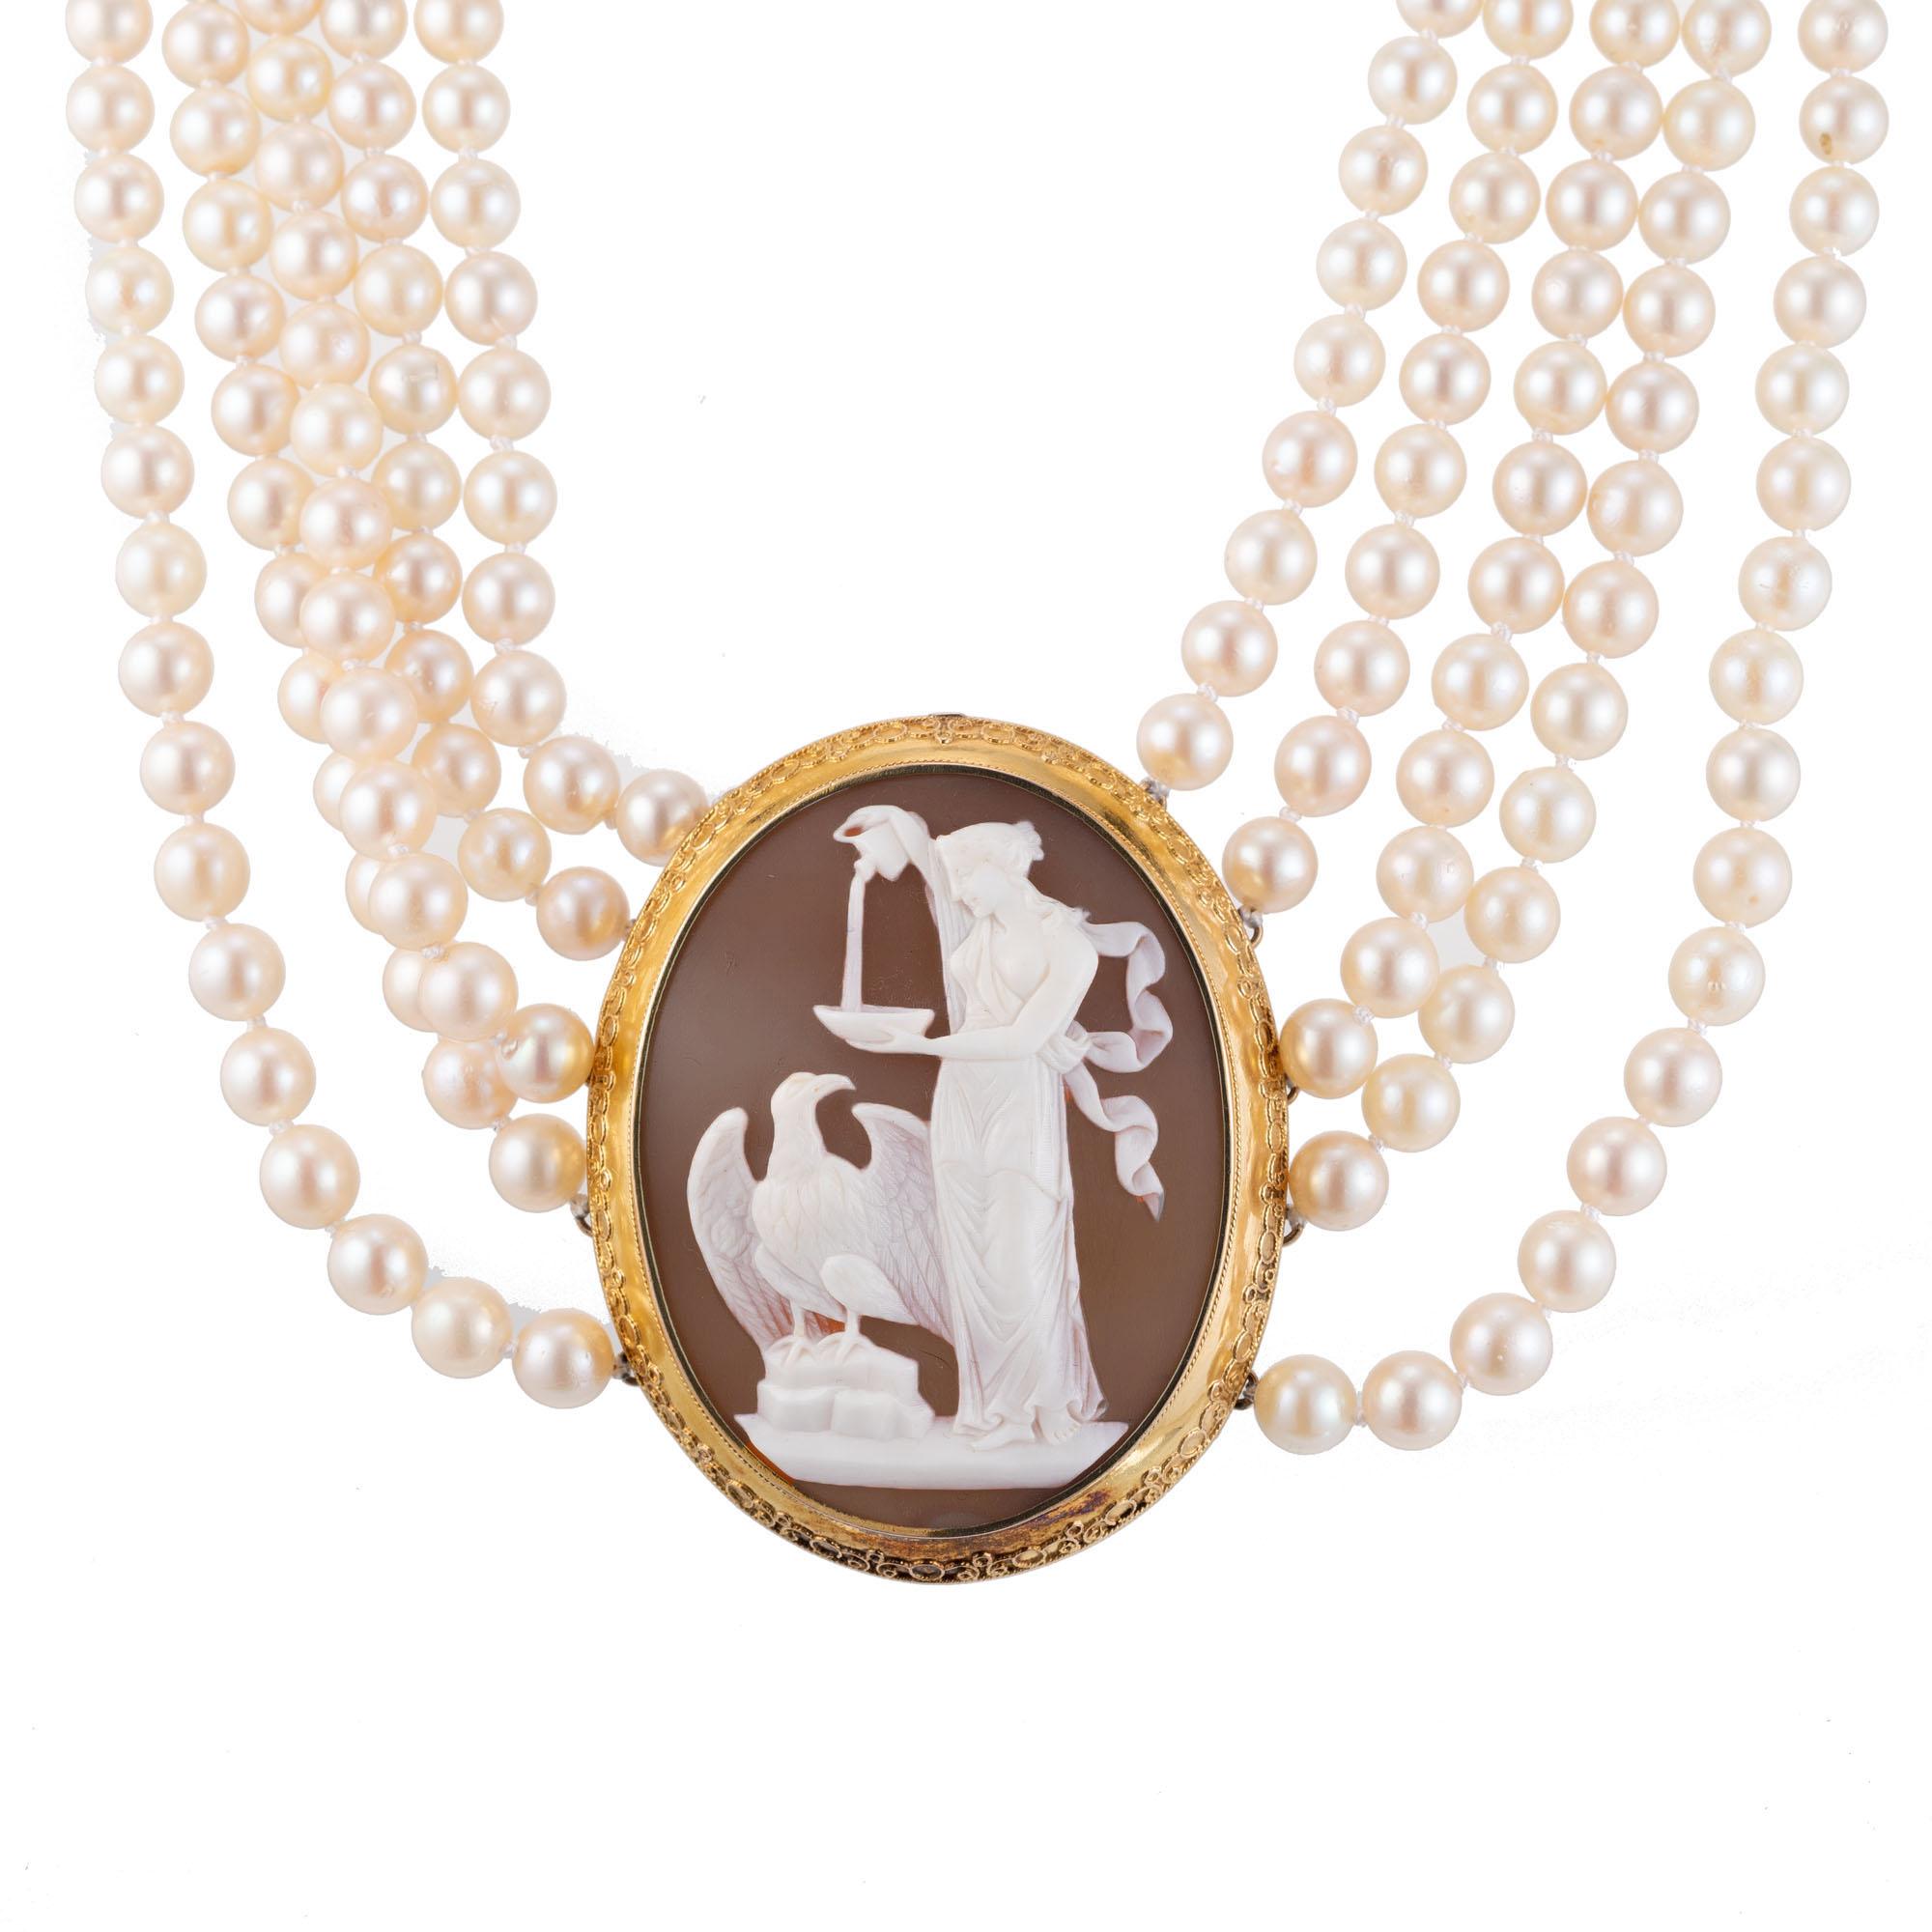 Vintage 1950's hand carved shell cameo and pearl necklace. The center is a hand carved Greek revival style old shell cameo circa 1900's, set in a 14k yellow gold bezel set frame with handmade embroidery. Attached are 5 strands of undyed, natural